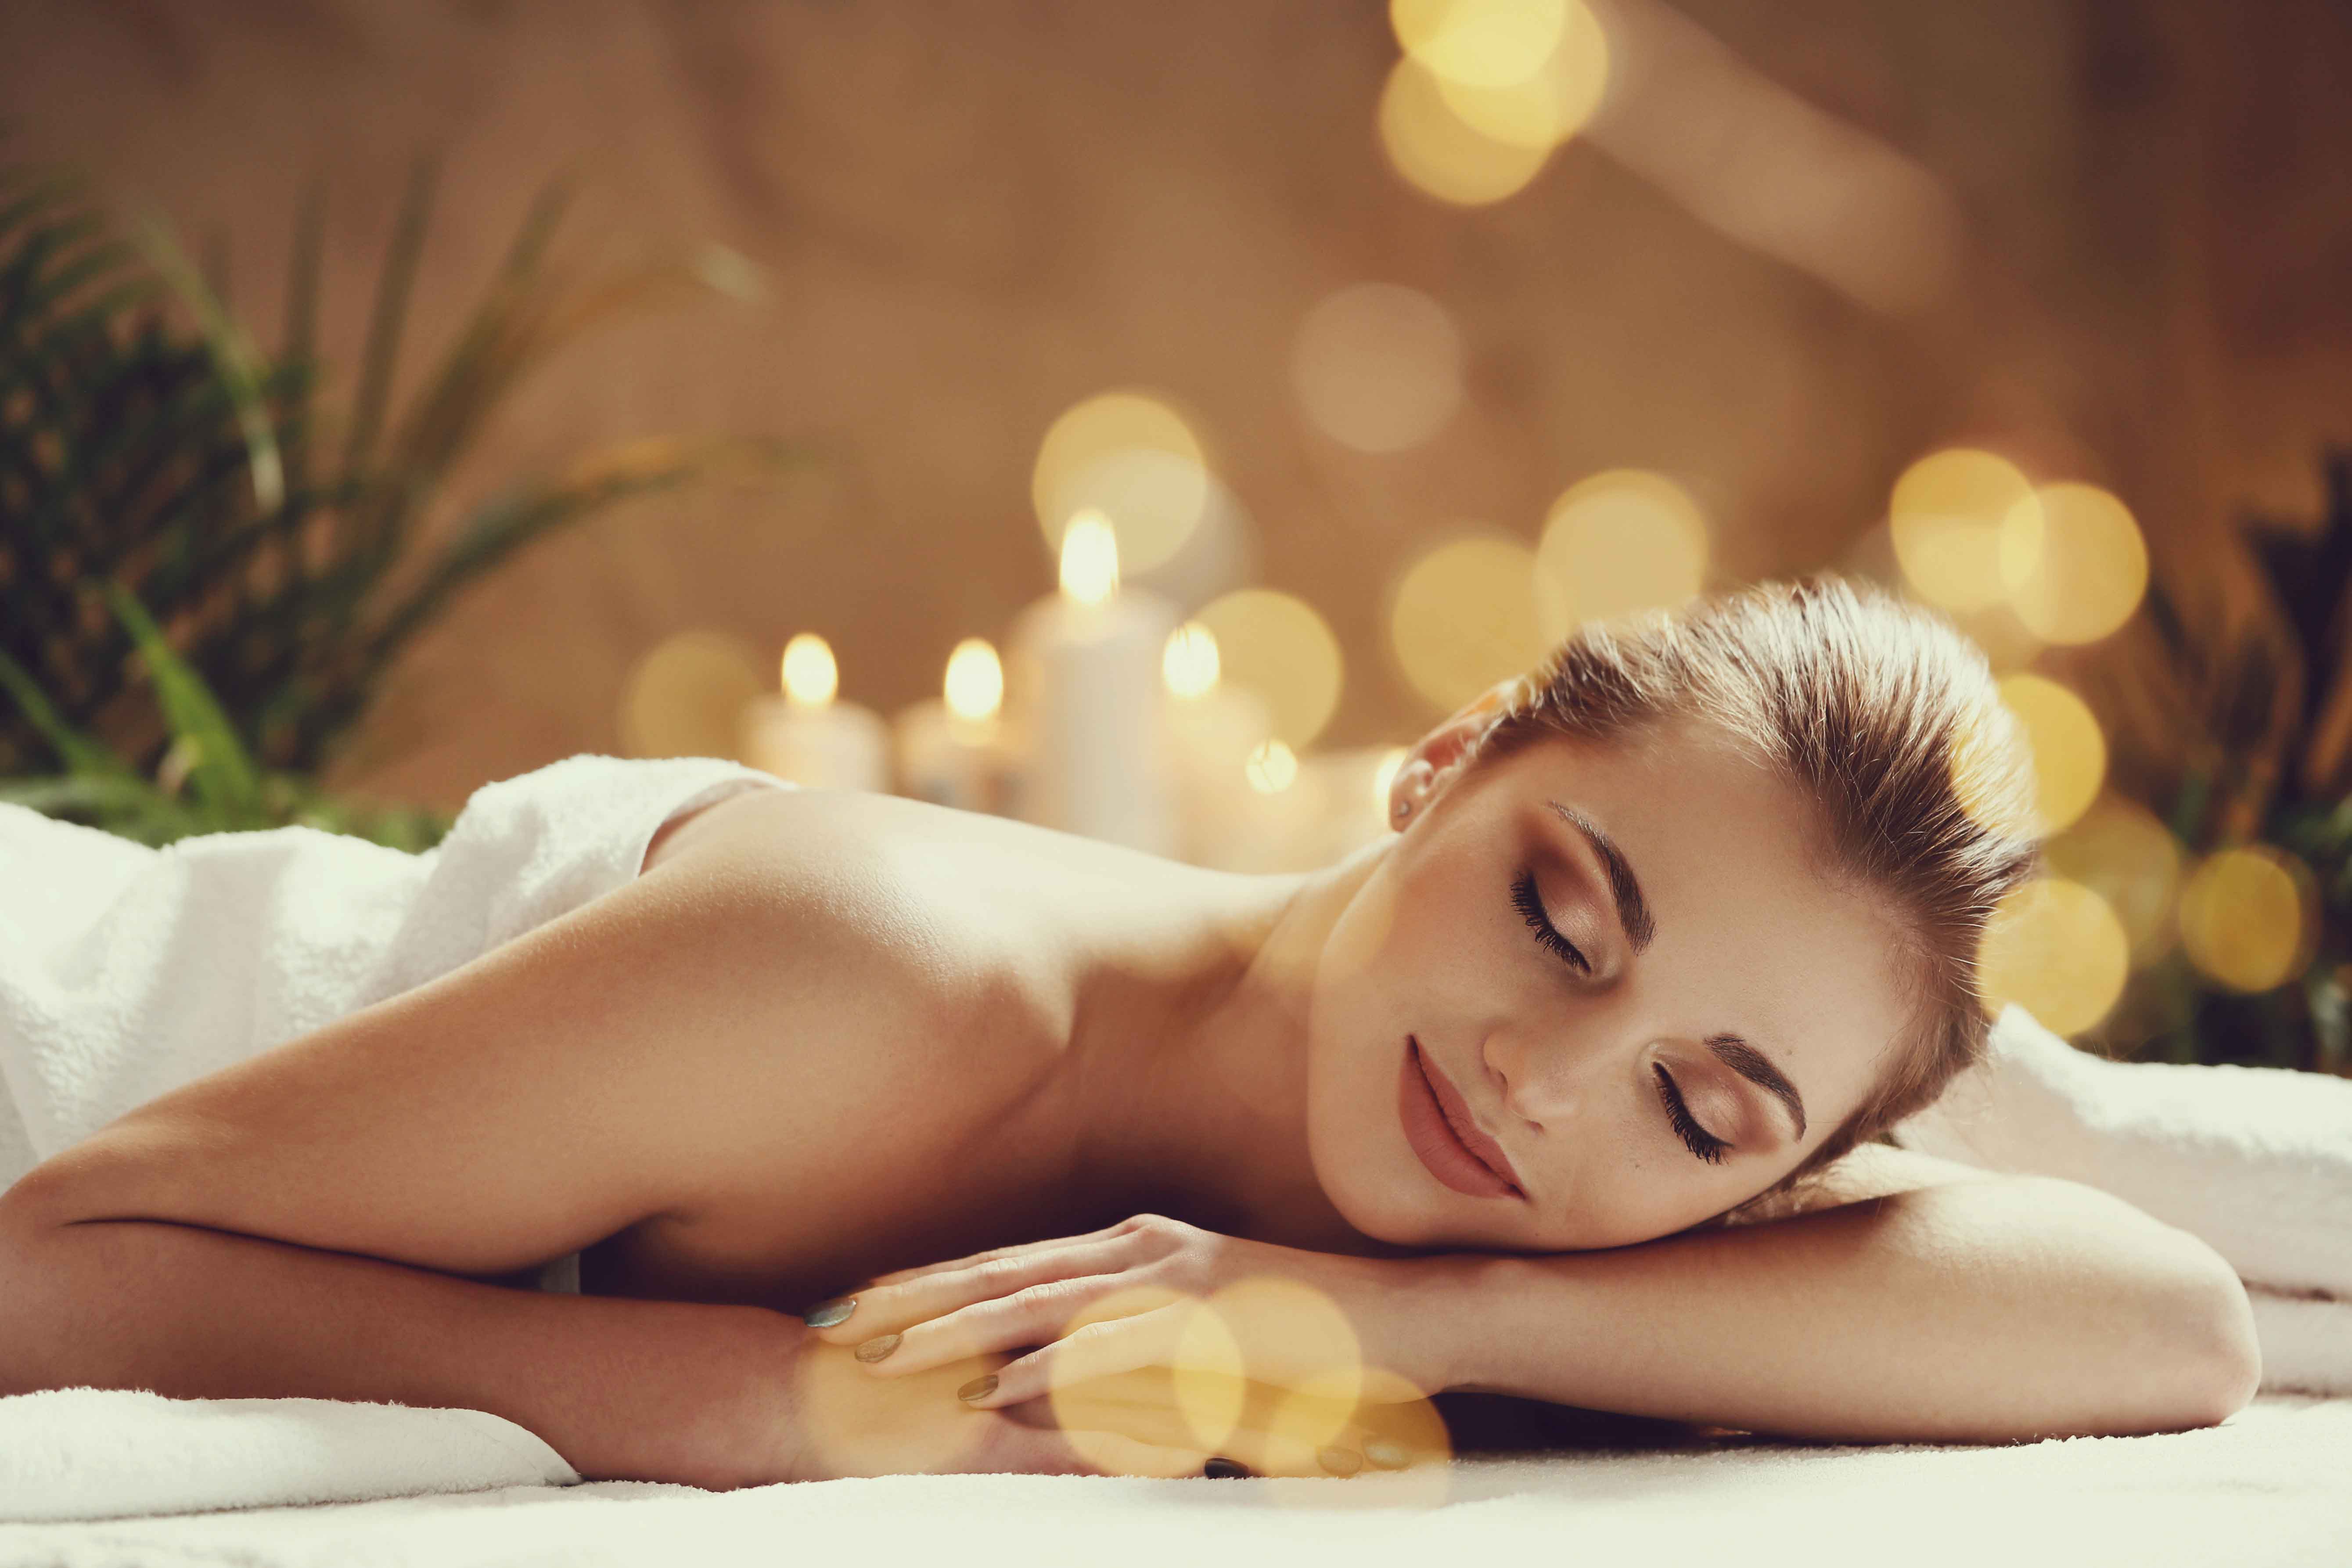 Woman wrapped in towel relaxing on spa bed